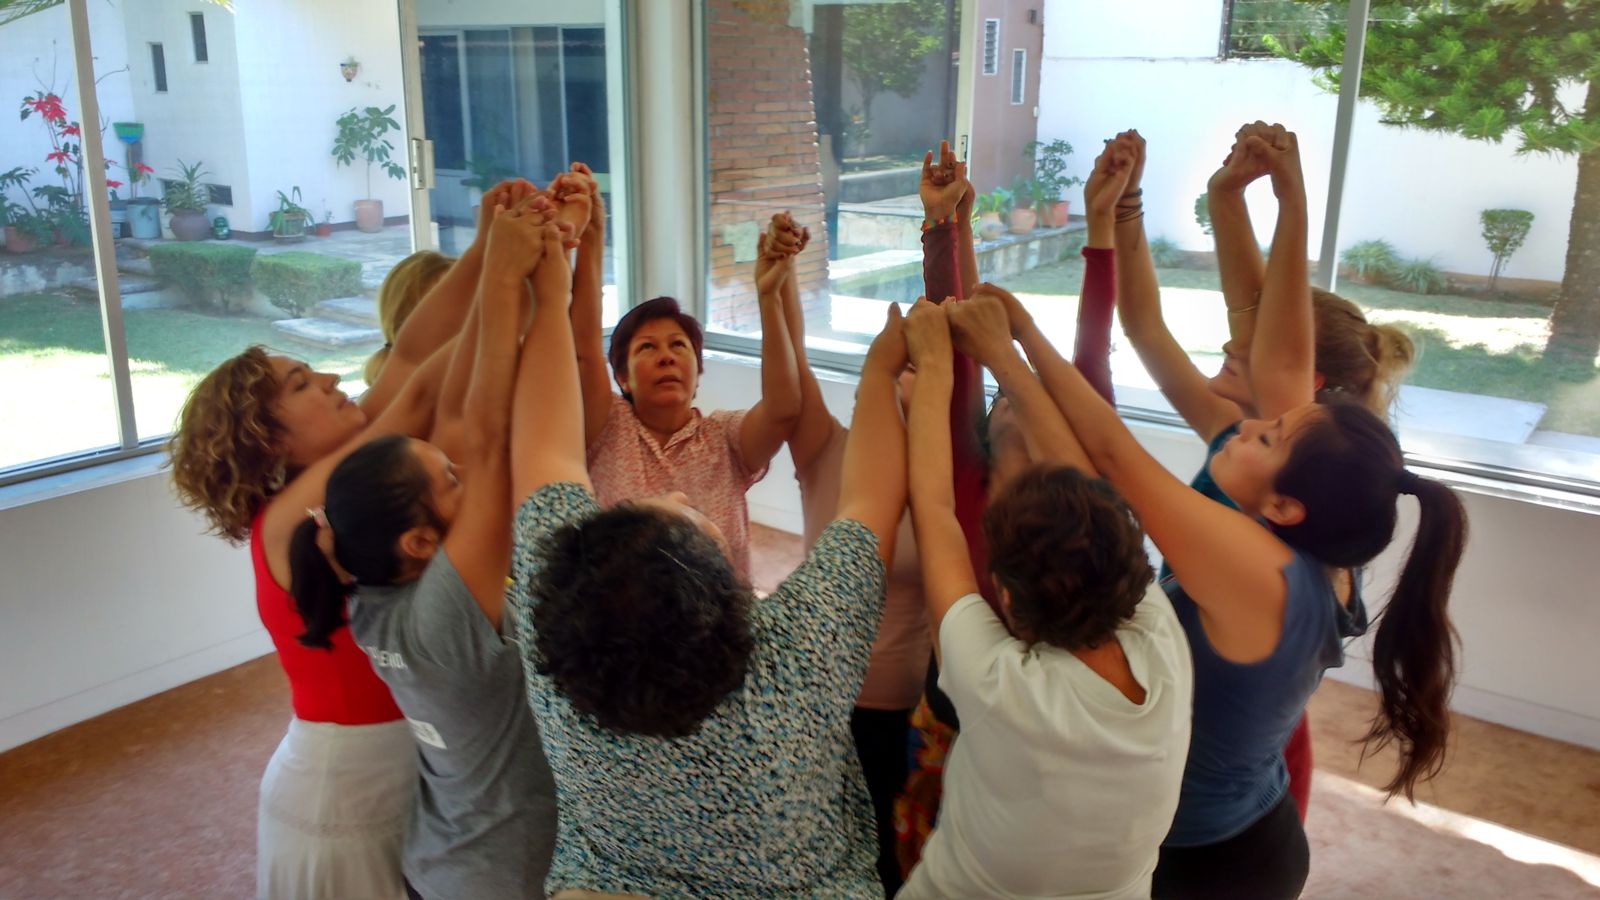 Creating a healing space for women human rights defenders